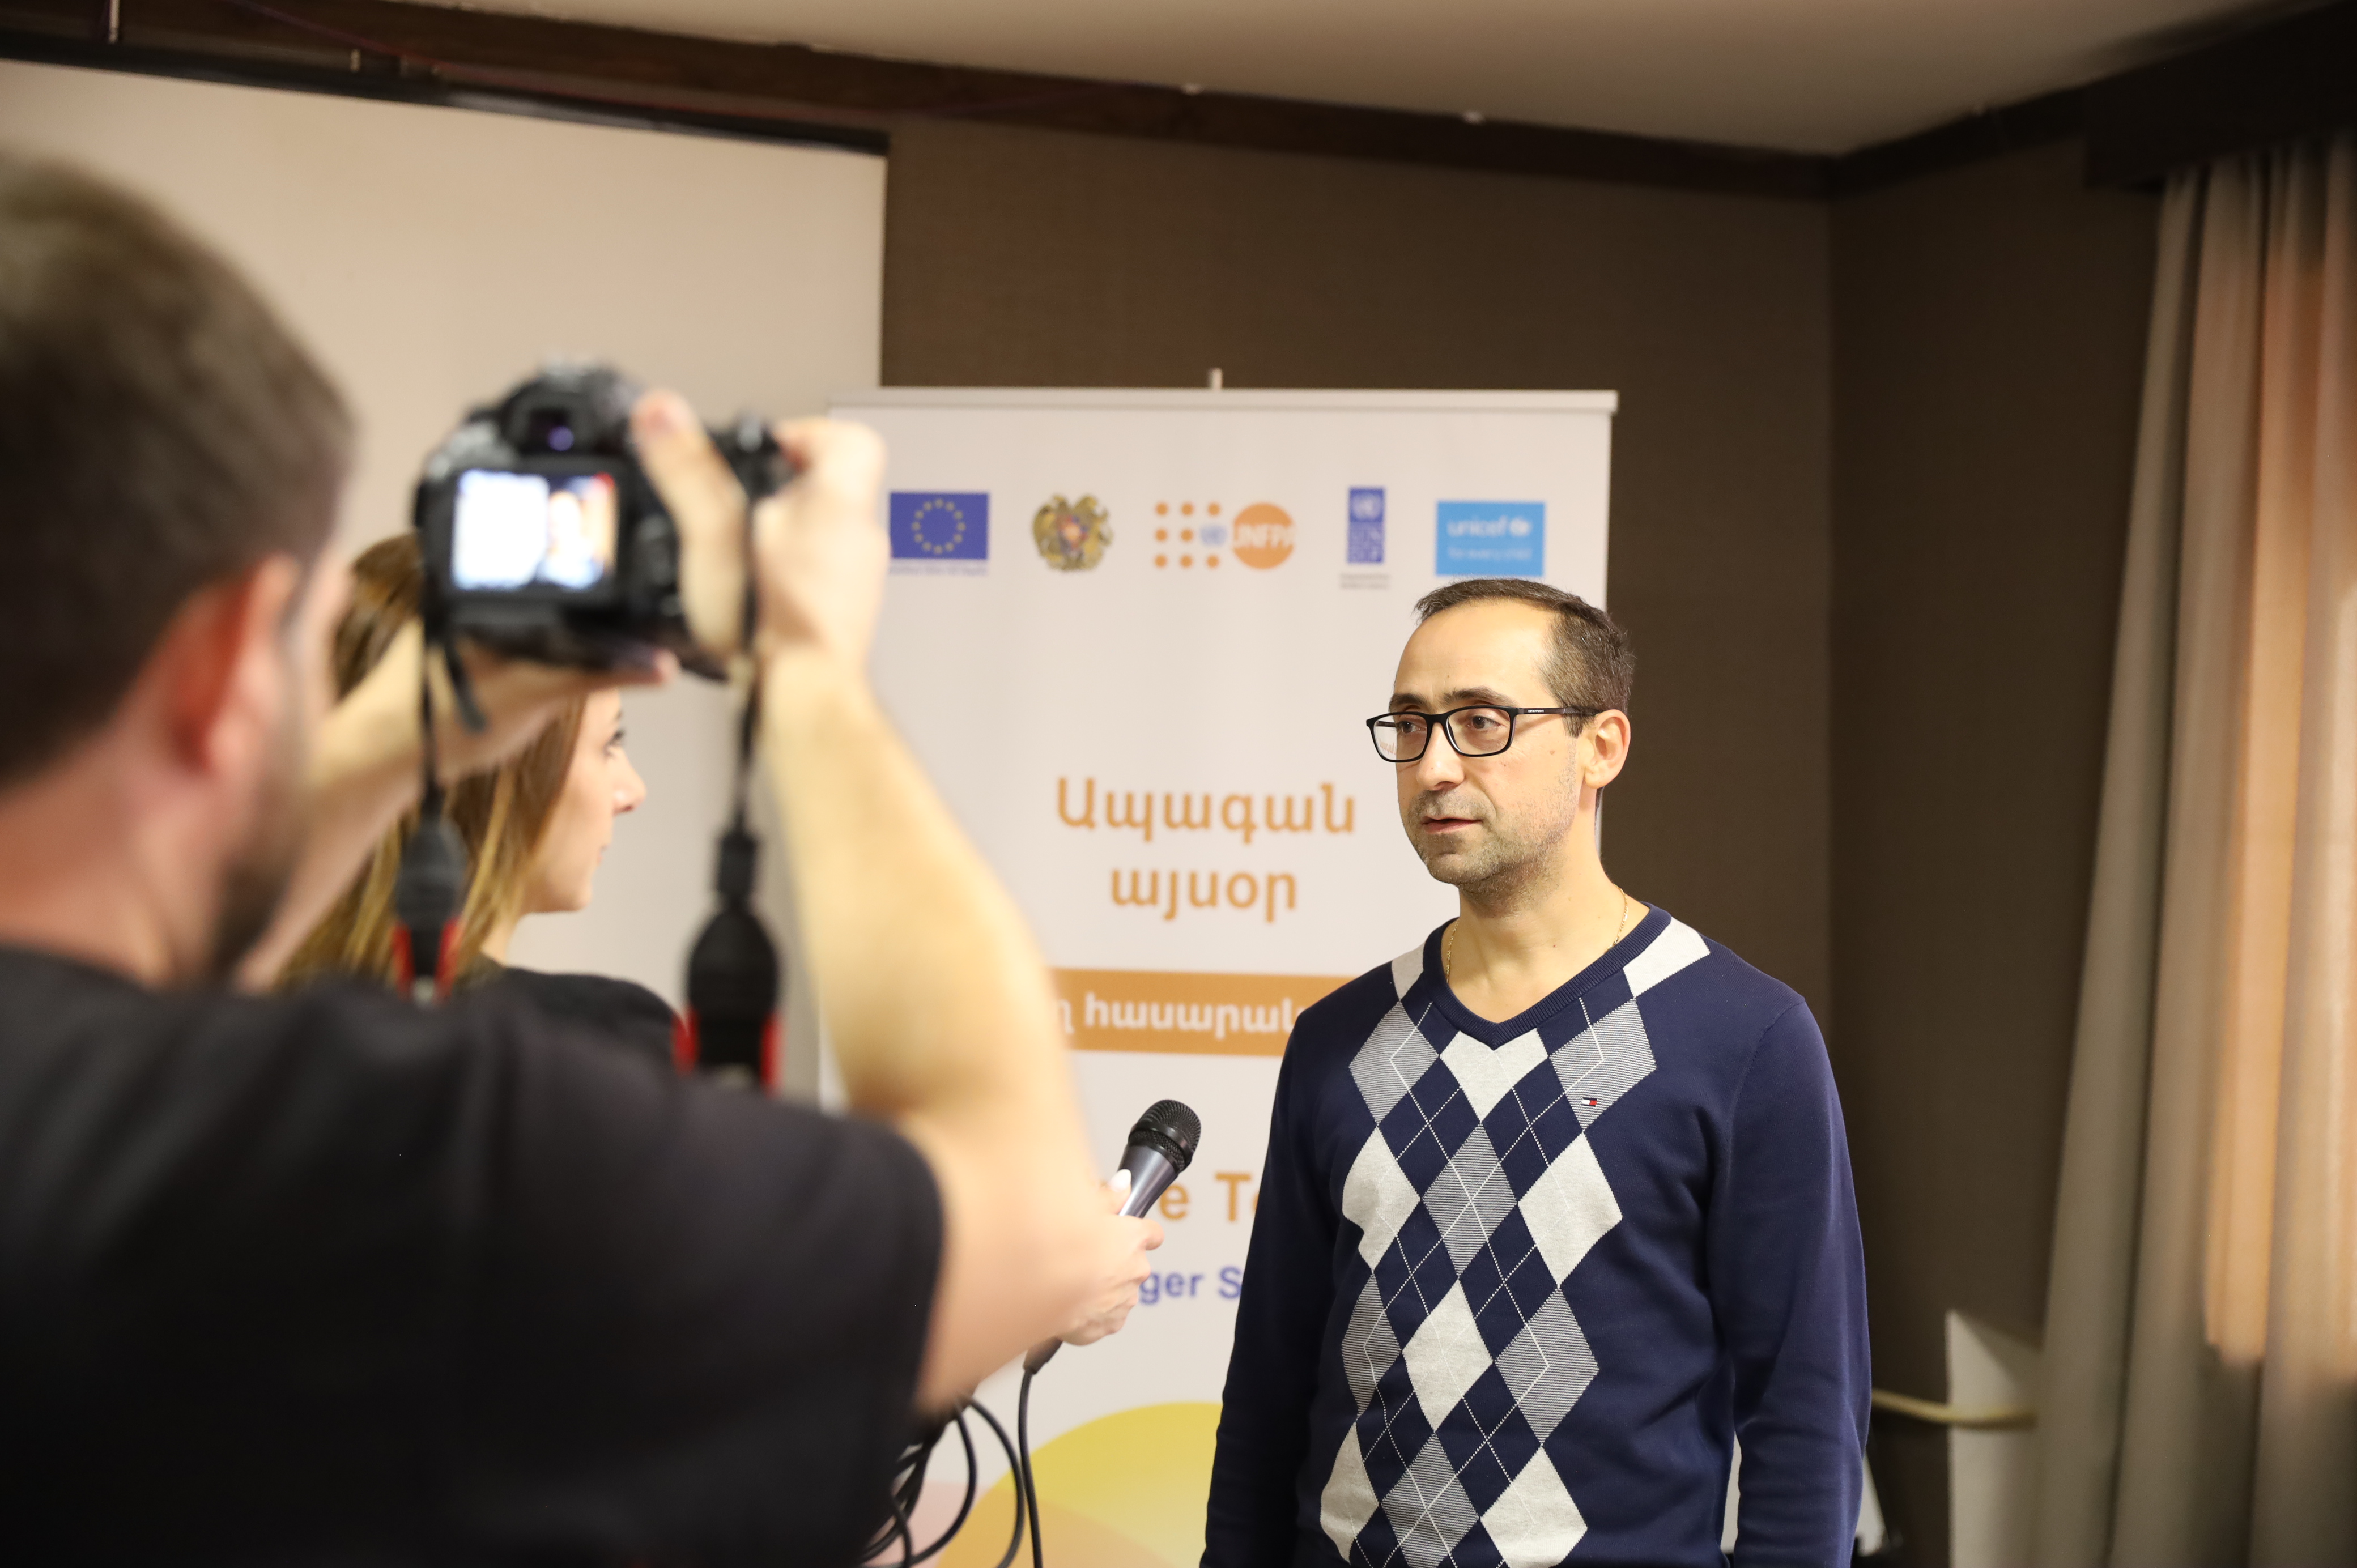 Eduard Israyelyan, Future Today Project Manager at UNFPA Armenia, speaking to the media in front of a project banner